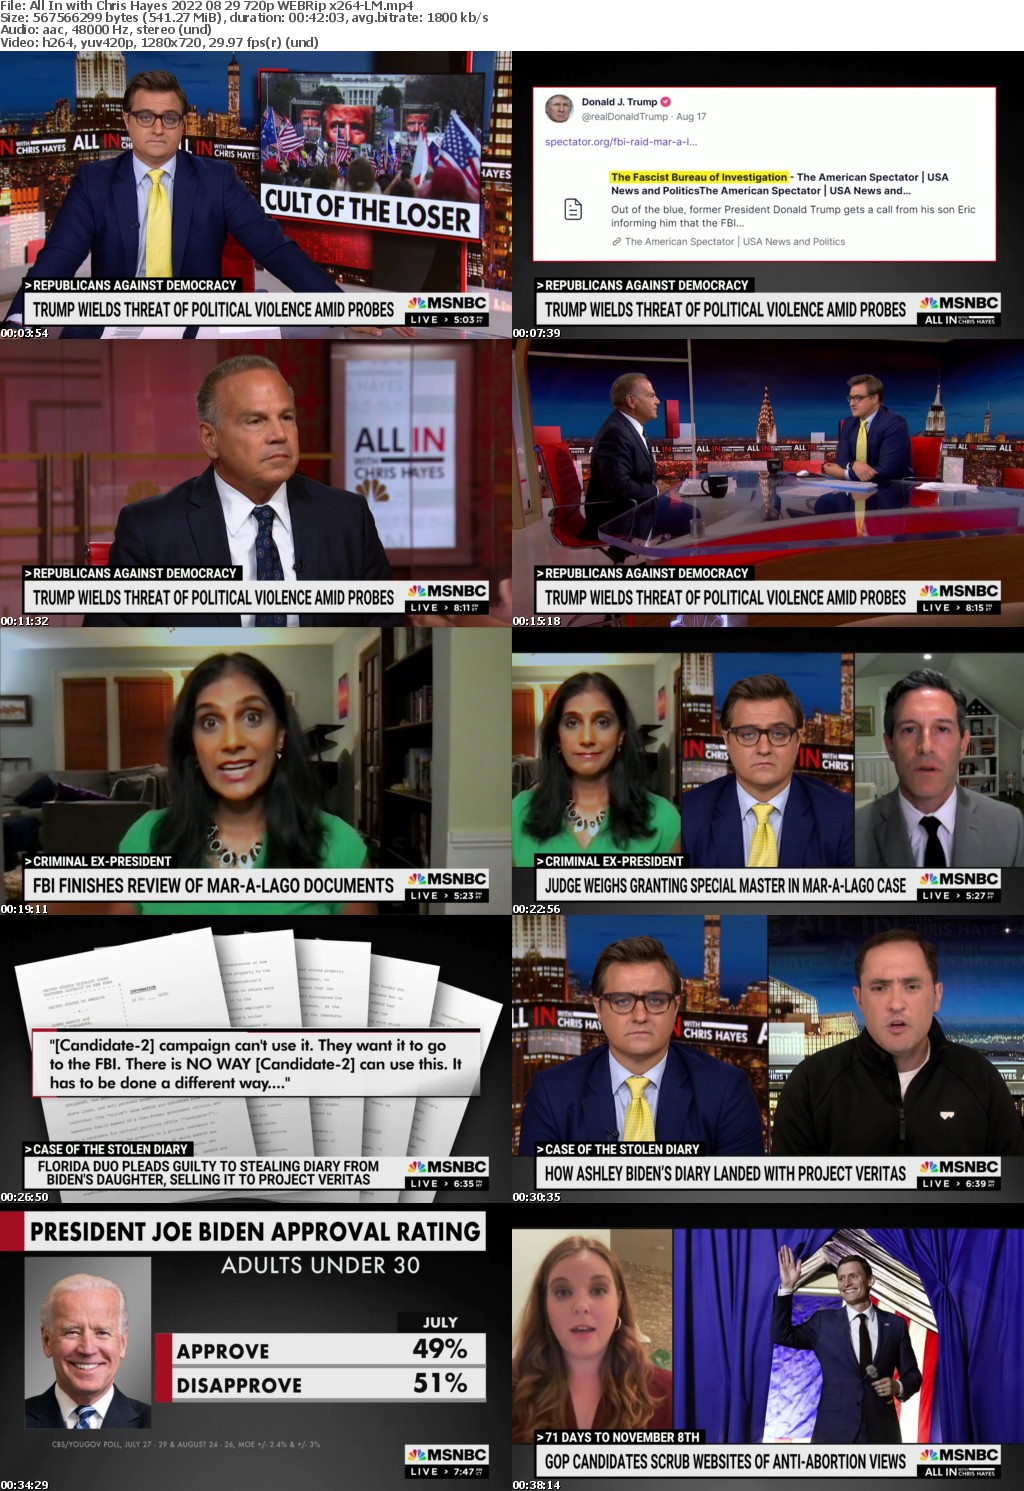 All In with Chris Hayes 2022 08 29 720p WEBRip x264-LM